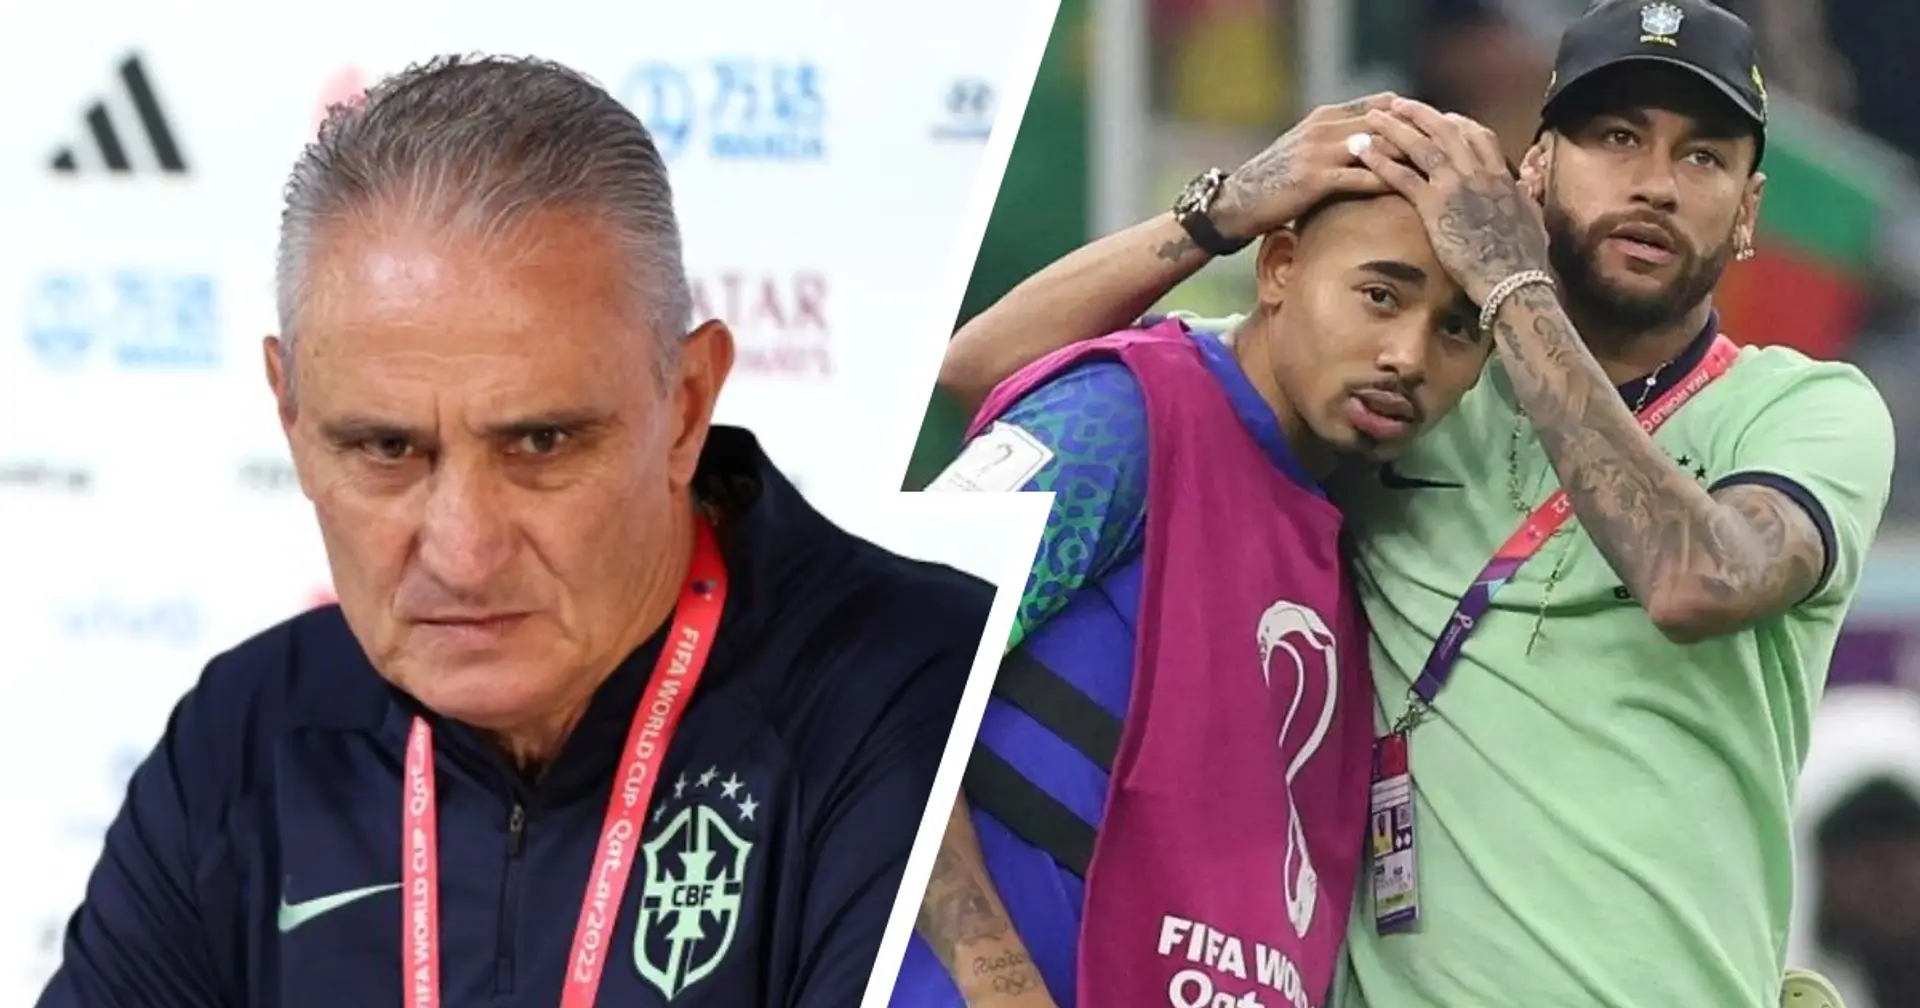 Brazil coach responds to claims that Gabriel Jesus was injured before World Cup